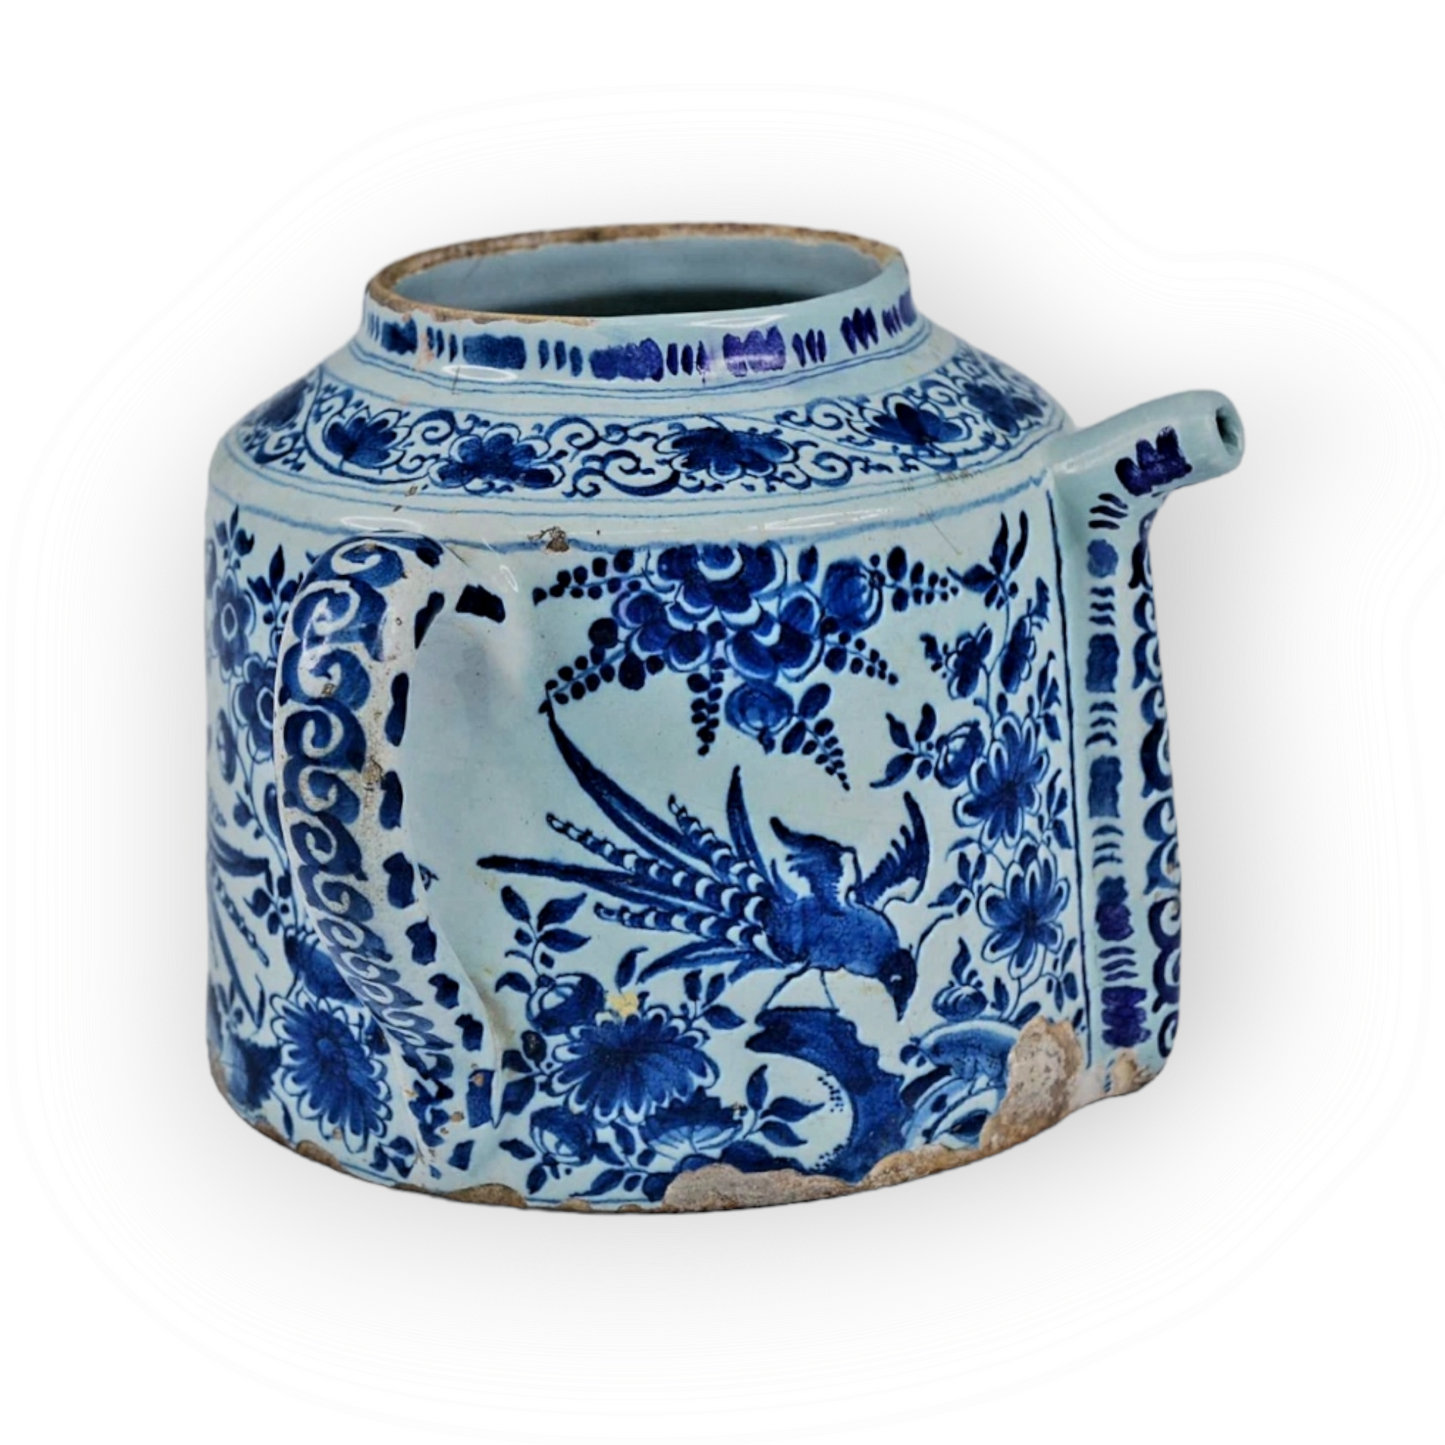 Early 18thC English Antique Blue & White Delftware Posset Pot, Attributed to Lambeth, London, Circa 1720